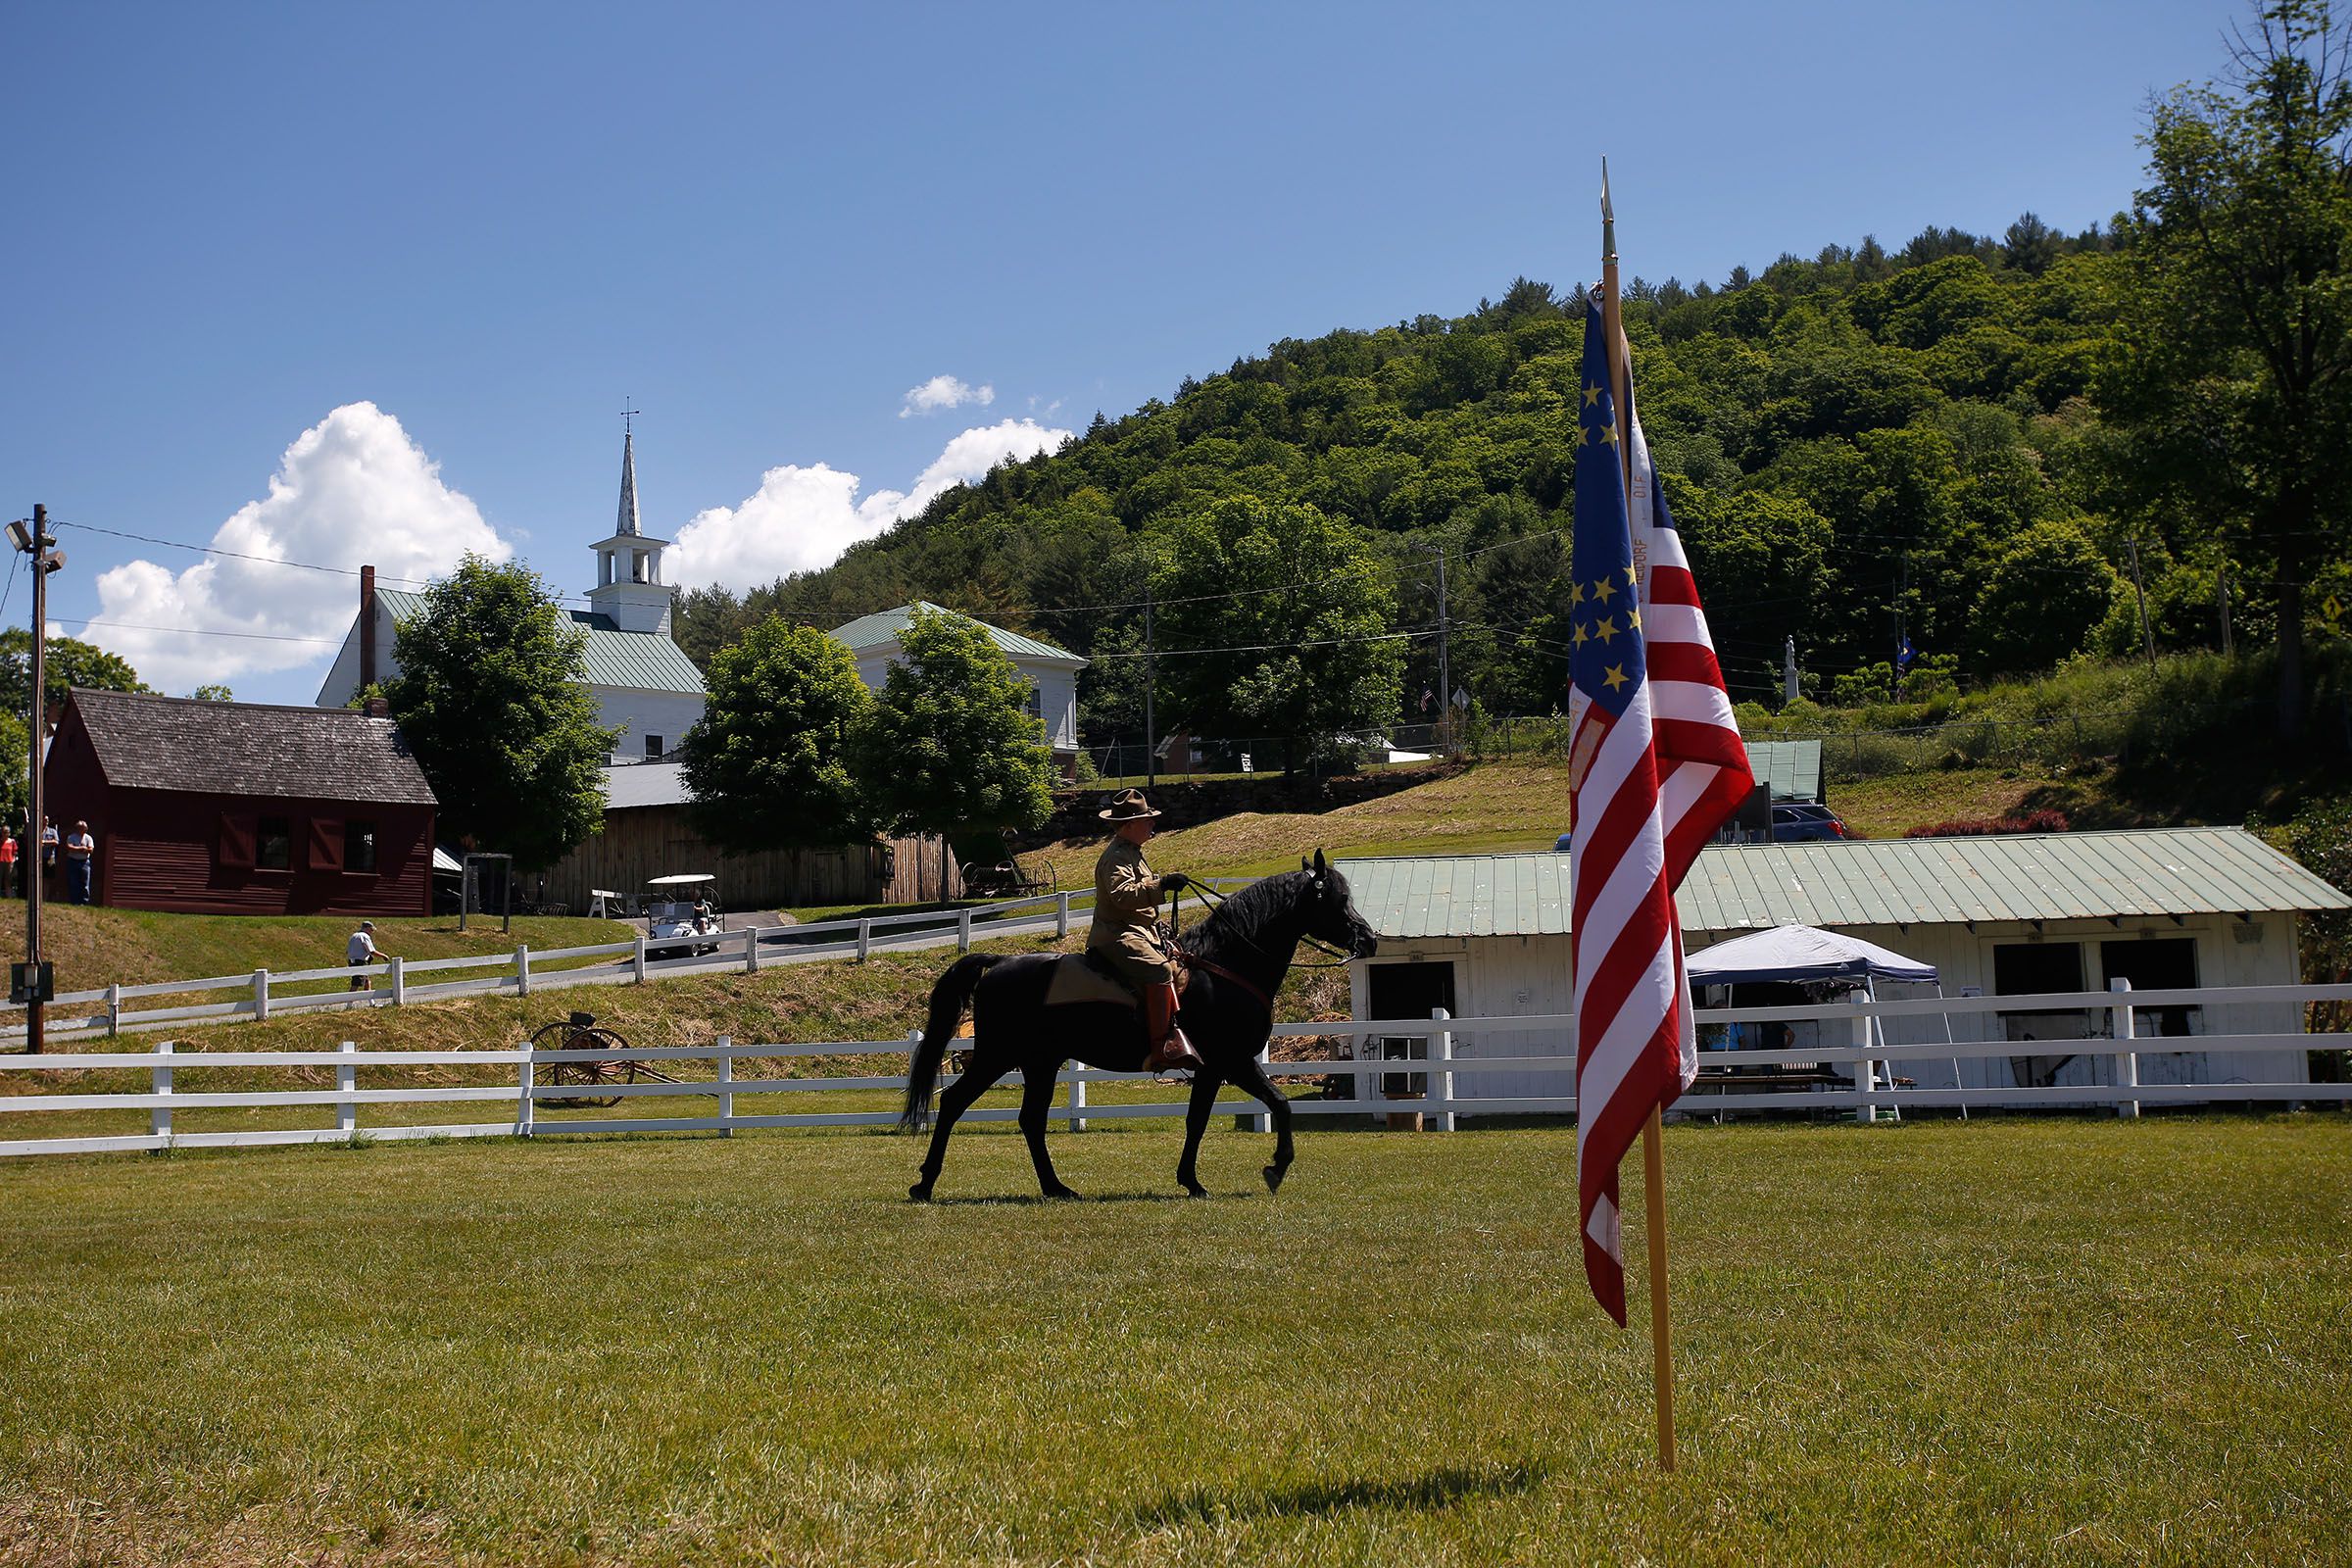 Wearing World War I-era tack and uniform, Chris Heidorf, of Gansevoort, N.Y., rides his 16-year-old Morgan stallion Coal Creek Black Oak while talking about the Morgan horse's role in warfare during Vermont History Expo 2016 in Tunbridge, Vt., on June 18, 2016. An Iraq veteran, Heidorf breeds Morgans at his farm and gives living history presentations across the East. (Valley News - Geoff Hansen) Copyright Valley News. May not be reprinted or used online without permission. Send requests to permission@vnews.com.